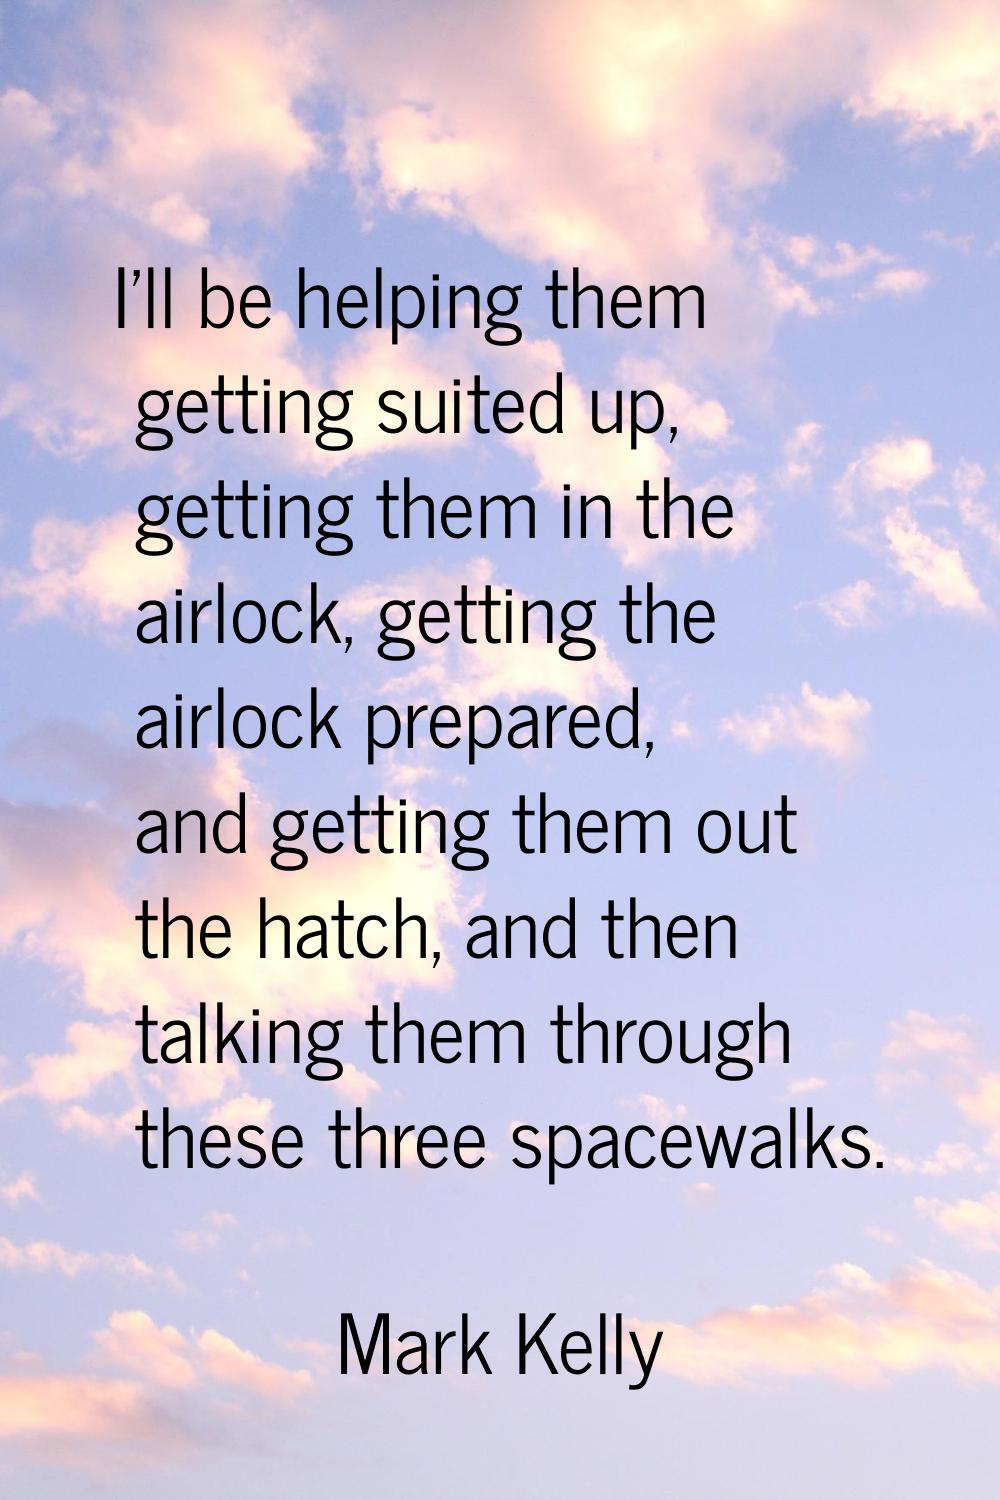 I'll be helping them getting suited up, getting them in the airlock, getting the airlock prepared, 